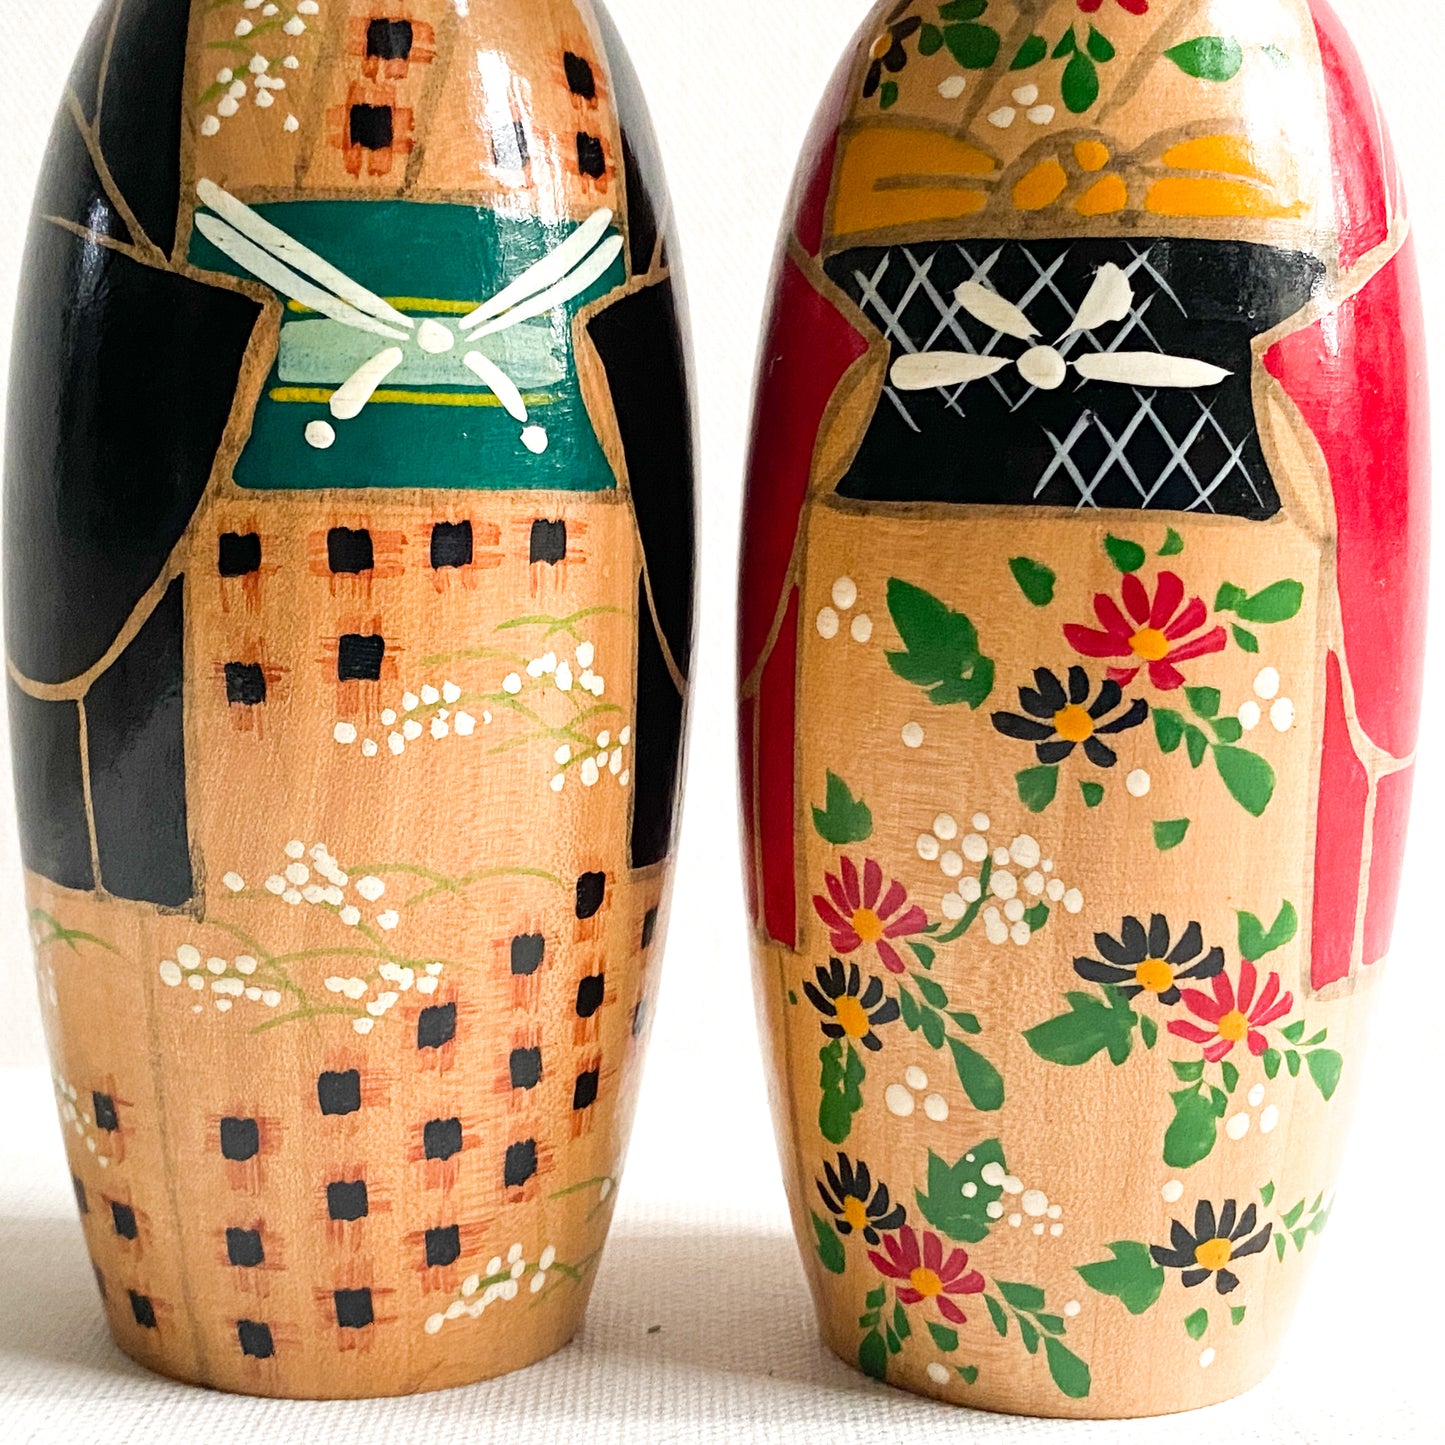 Vintage Kokeshi Doll Pair with nodding heads